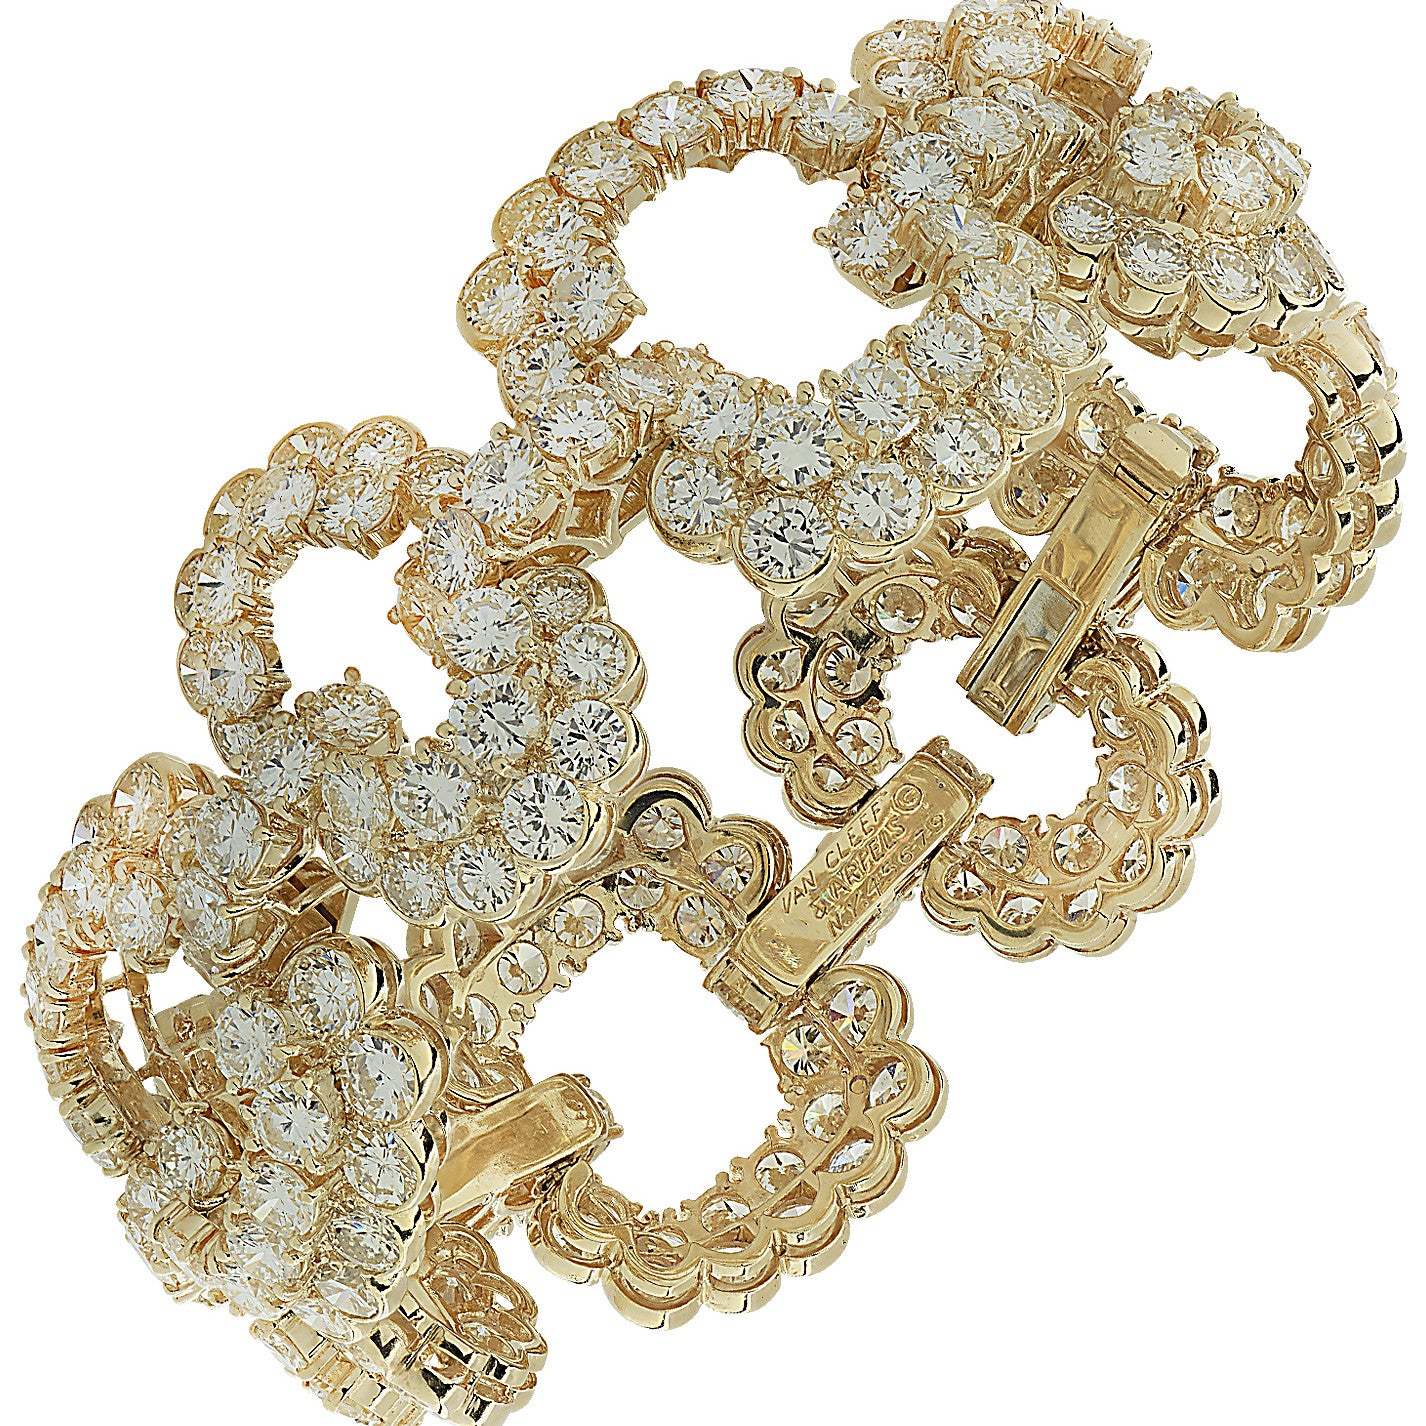 Van Cleef & Arpels 1970s 18KT Yellow Gold Diamond Bracelet angled top view showing signature